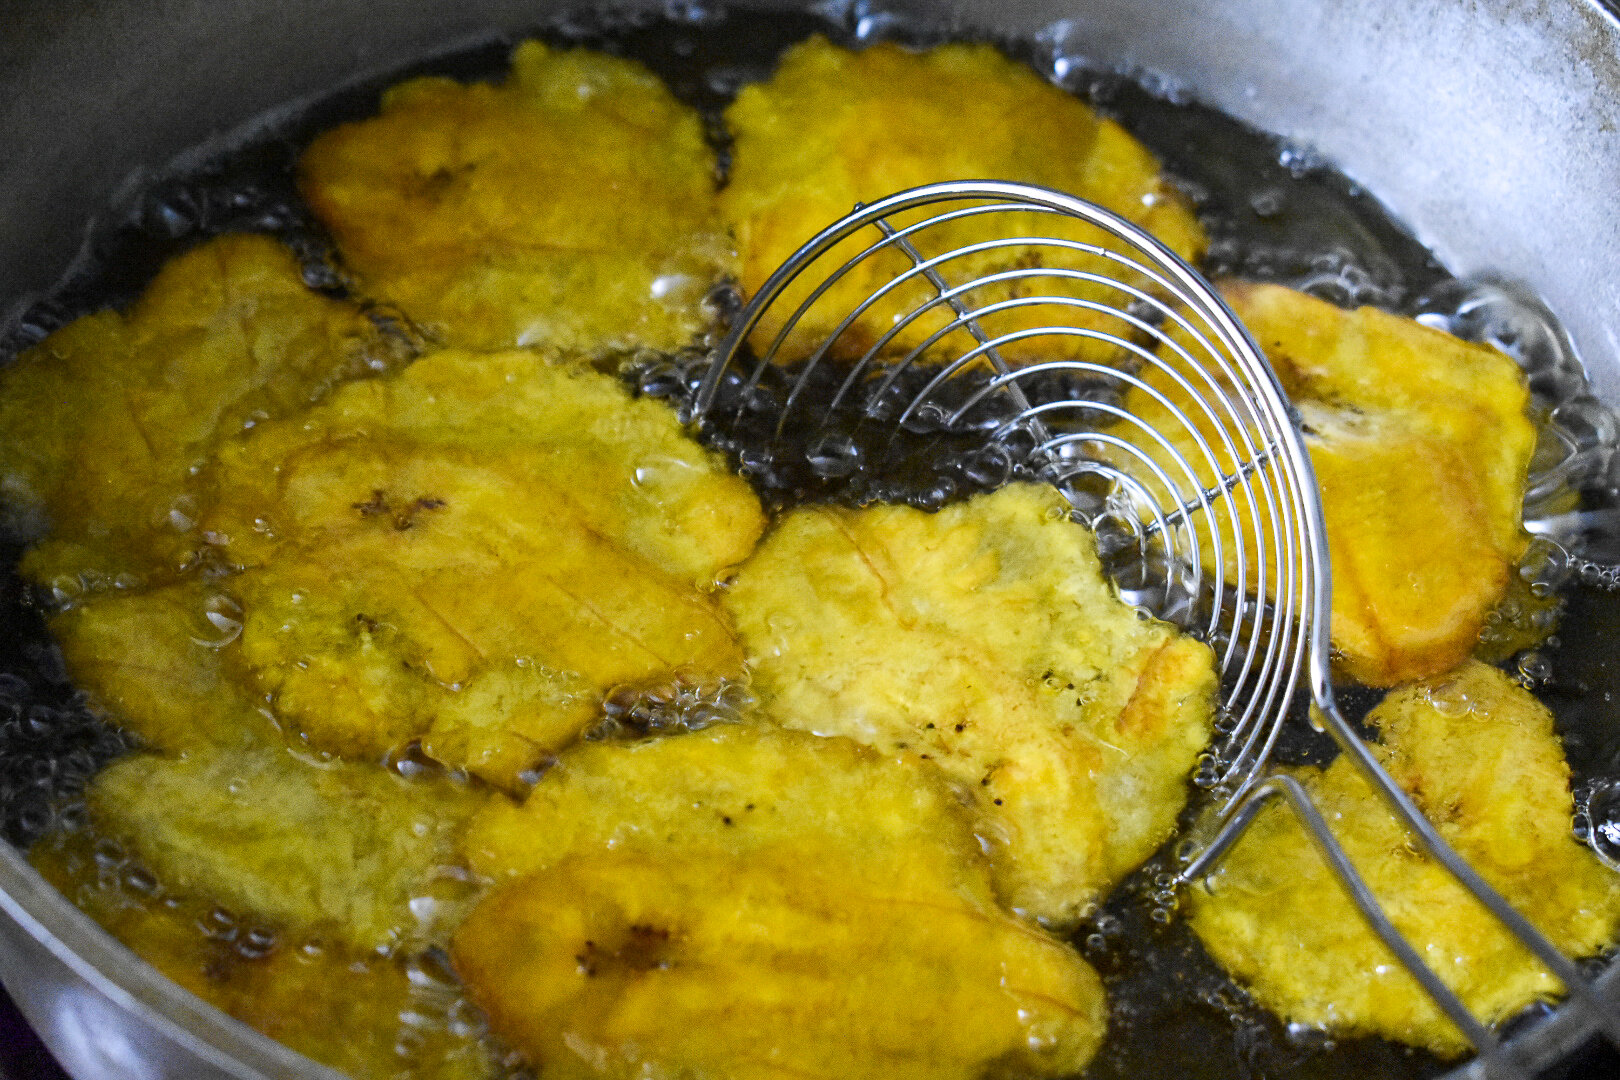 TIPS FOR FRYING PATACONES